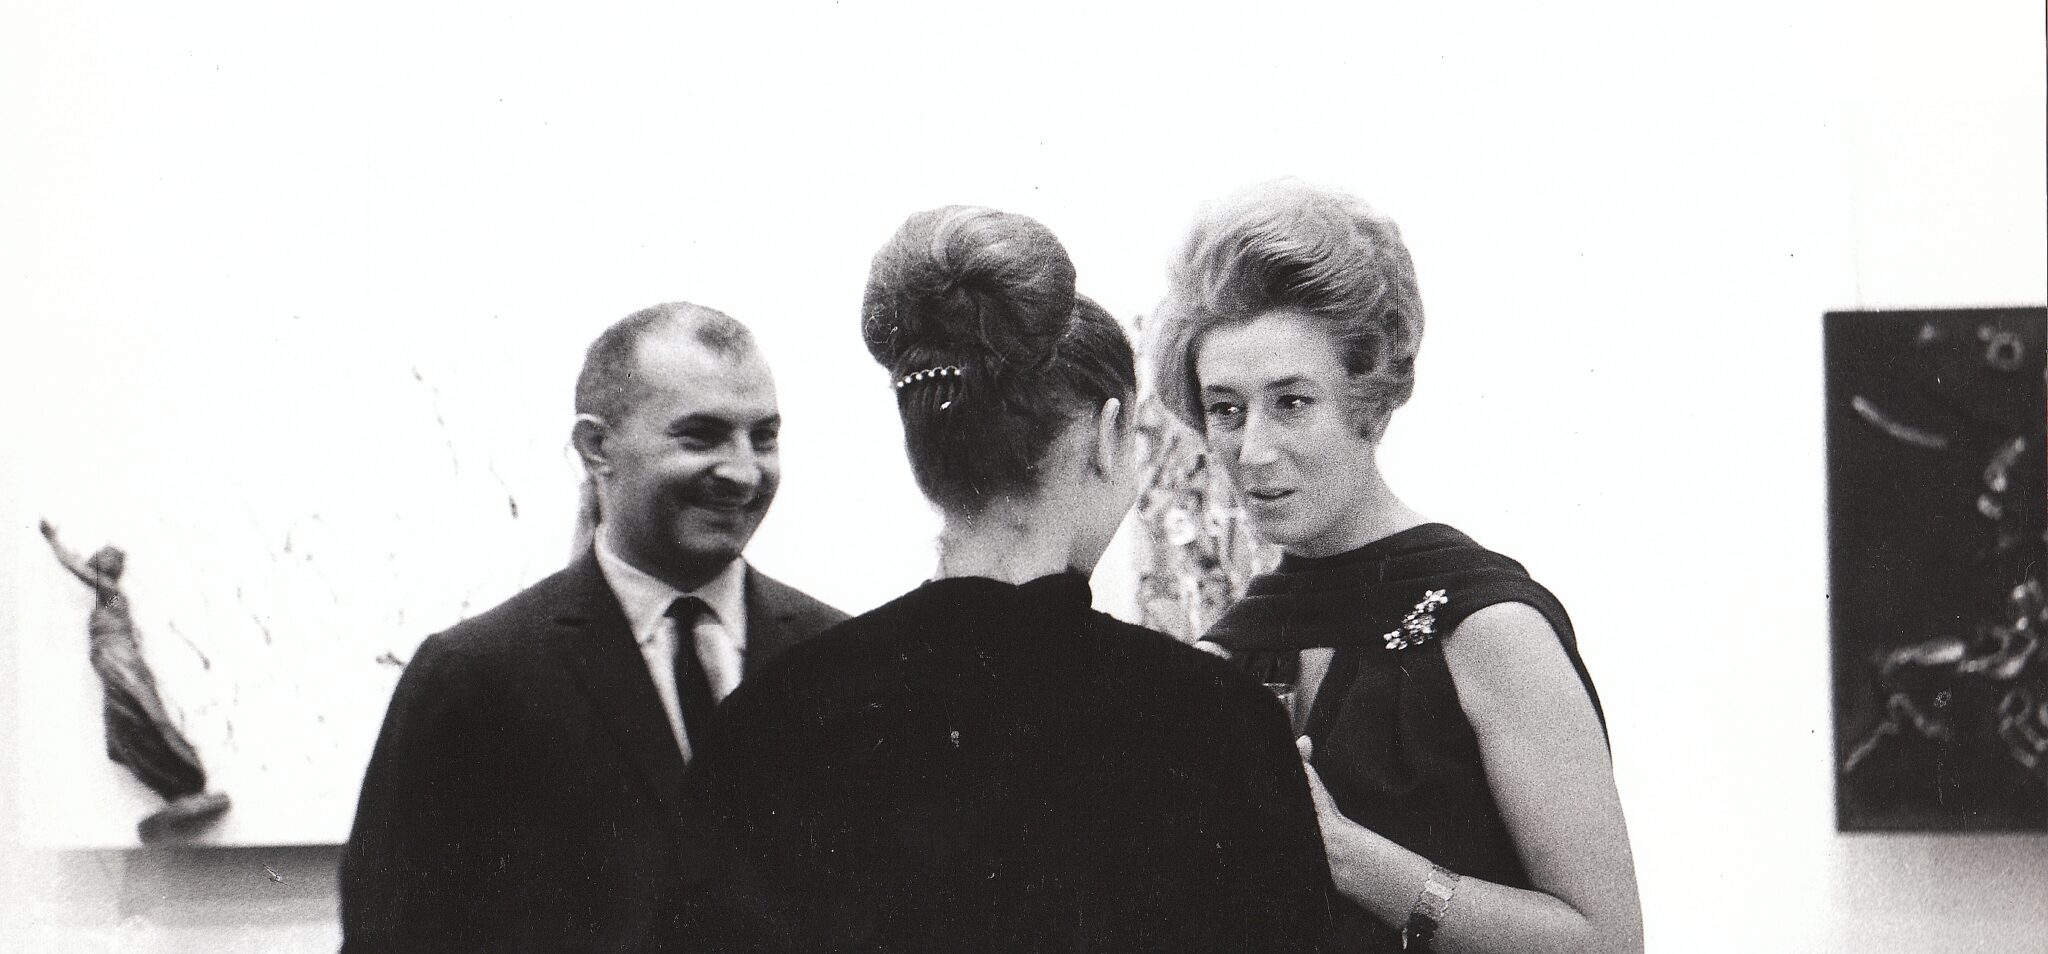 Jaqueline with Arman at his exhibition in 1963